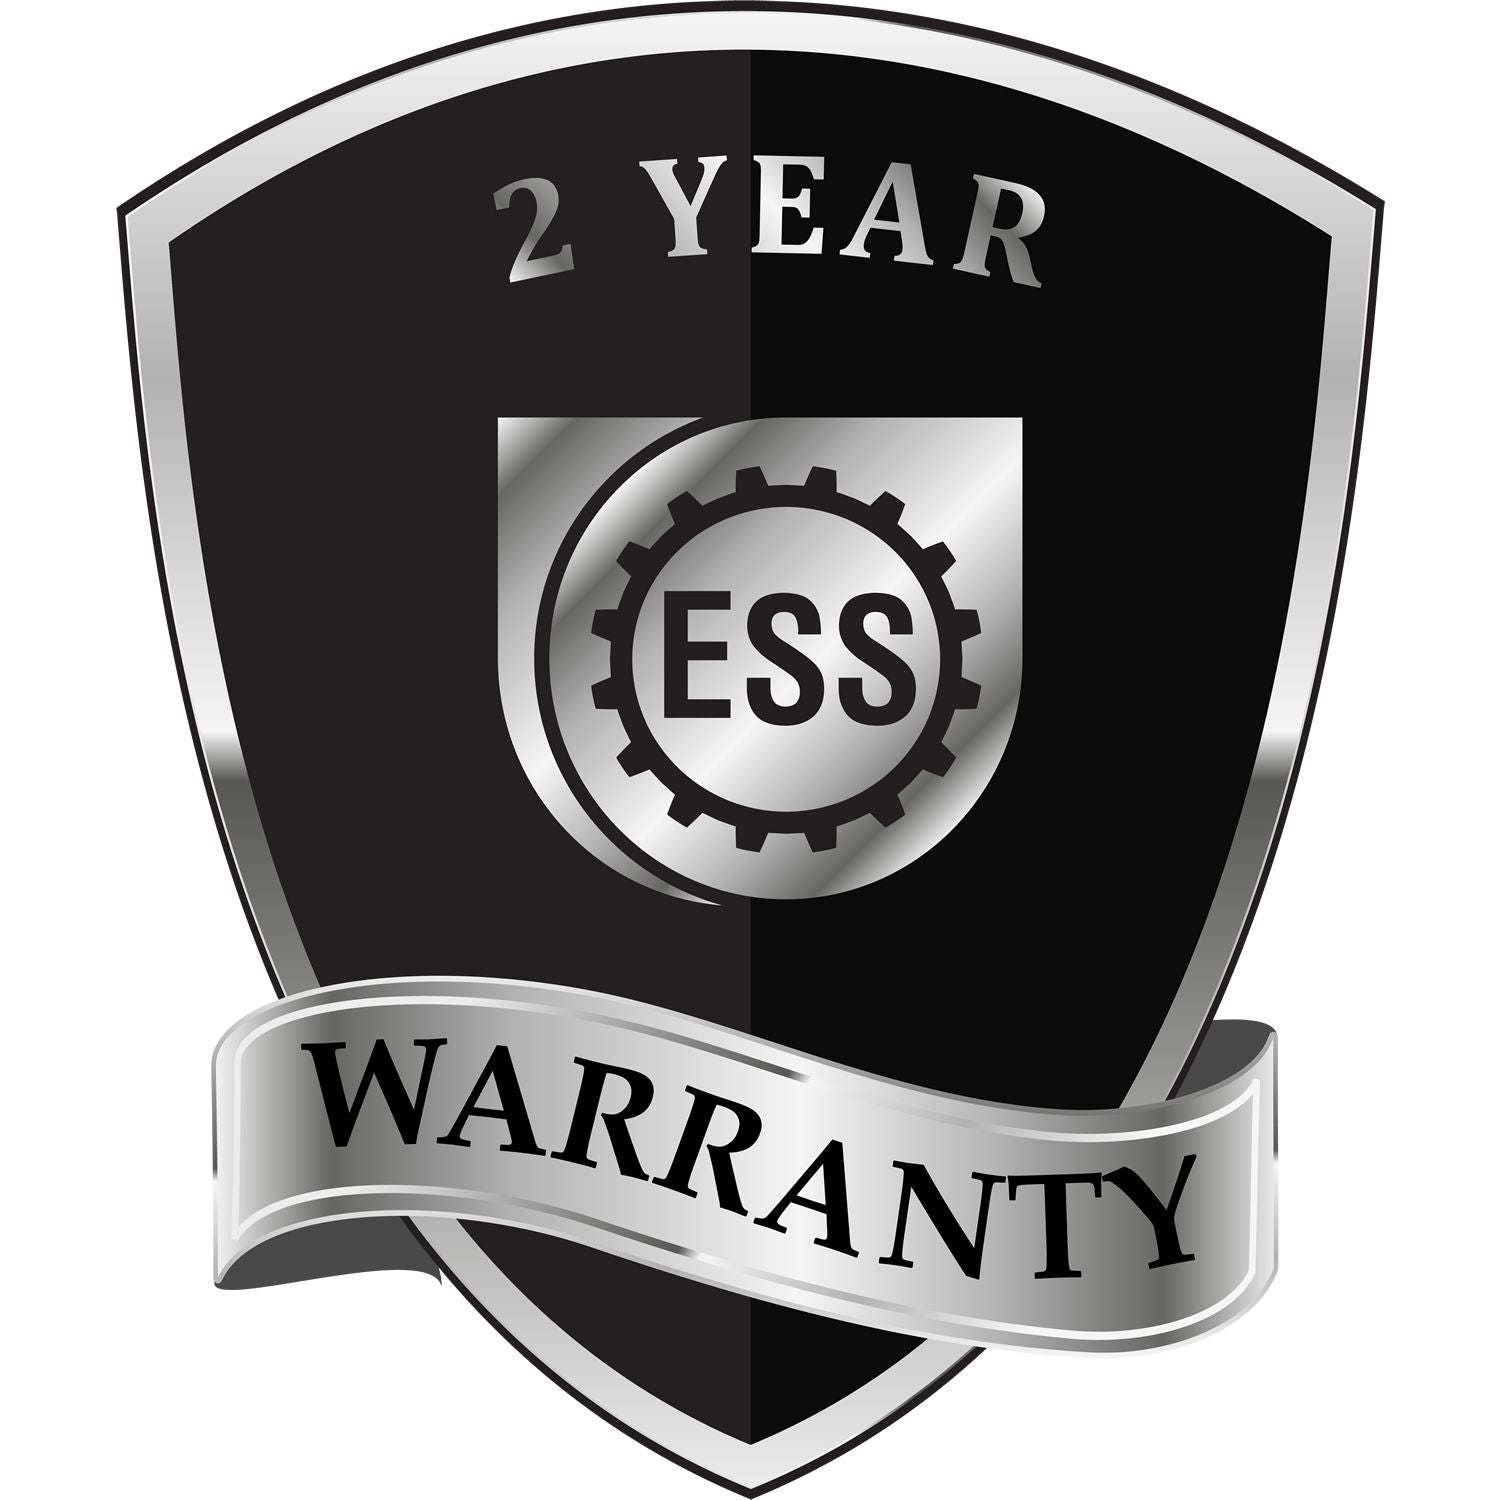 A badge or emblem showing a warranty icon for the Handheld New York Land Surveyor Seal